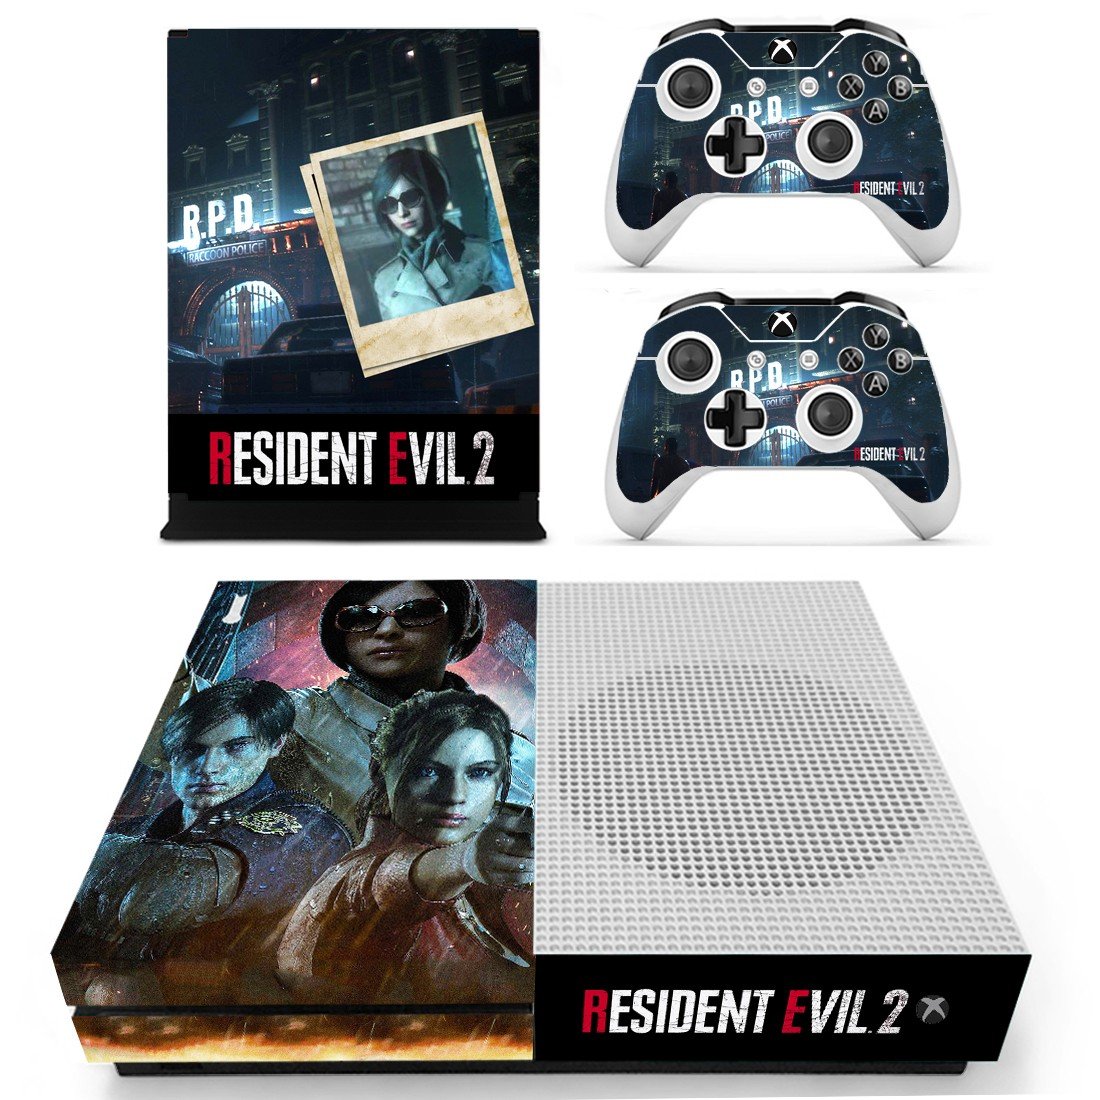 Resident Evil 2 Sticker For Xbox One S And Controllers